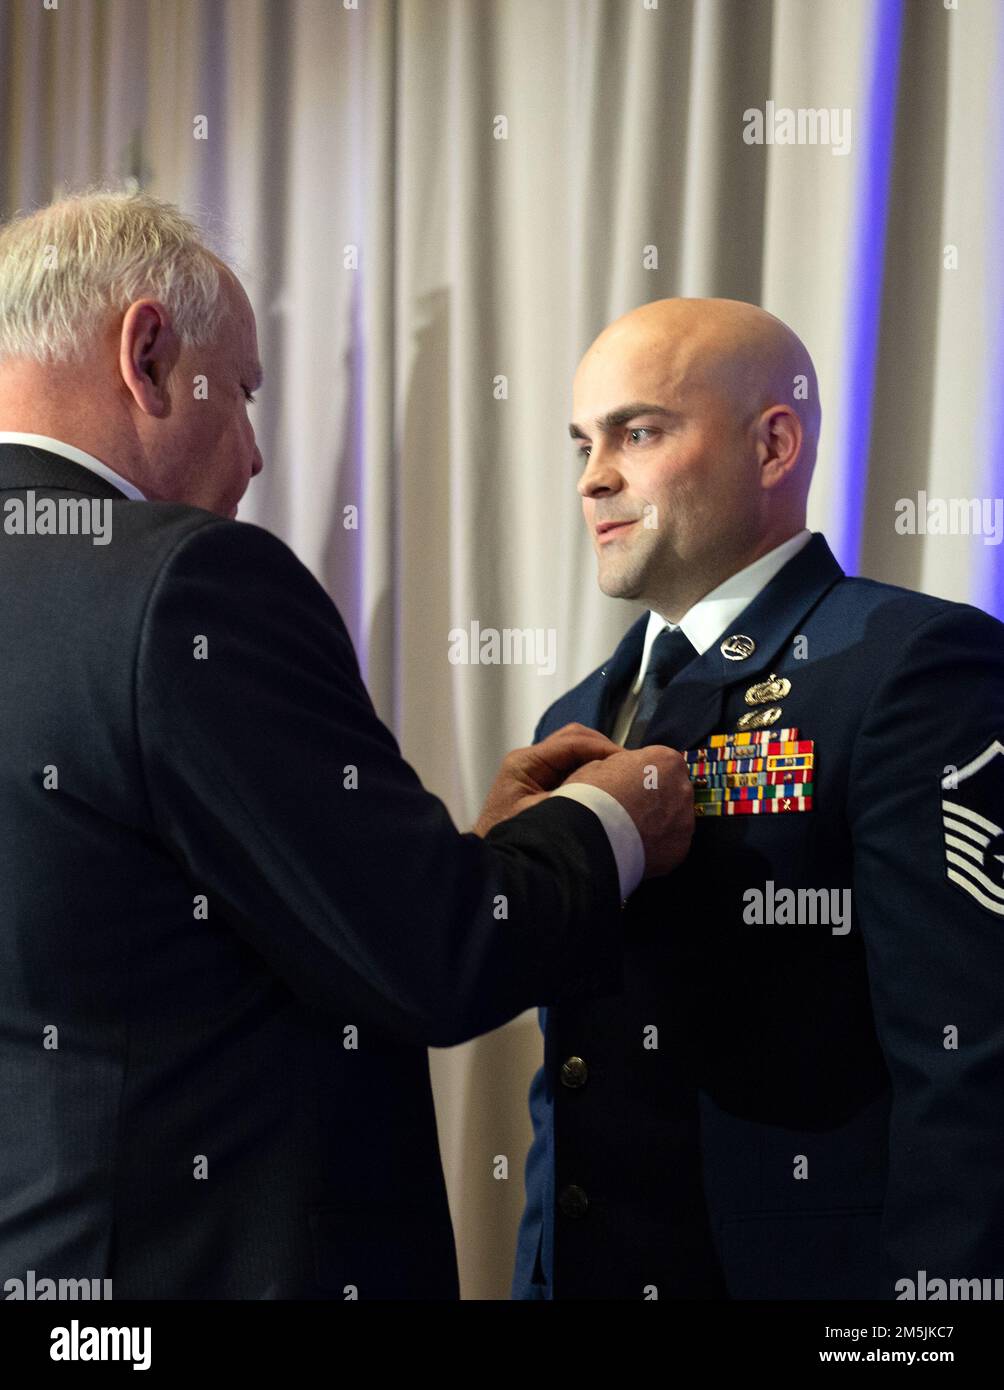 U.S. Air Force Master Sgt. Shane Trisco, 133rd Maintenance Group, right, received the Meritorious Service Medal from Minnesota Gov. Tim Walz in St. Paul, Minn., March 19, 2022. During a recent deployment, Trisco provided excellent administrative and personnel duties for the largest maintenance organization within the U.S. Air Forces Central Command by leading 11 members and 22 programs for over 1,000 Airmen, which generated more than 5,000 combat missions in support of Operations INHERENT RESOLVE and FREEDOM’S SENTINEL. Stock Photo